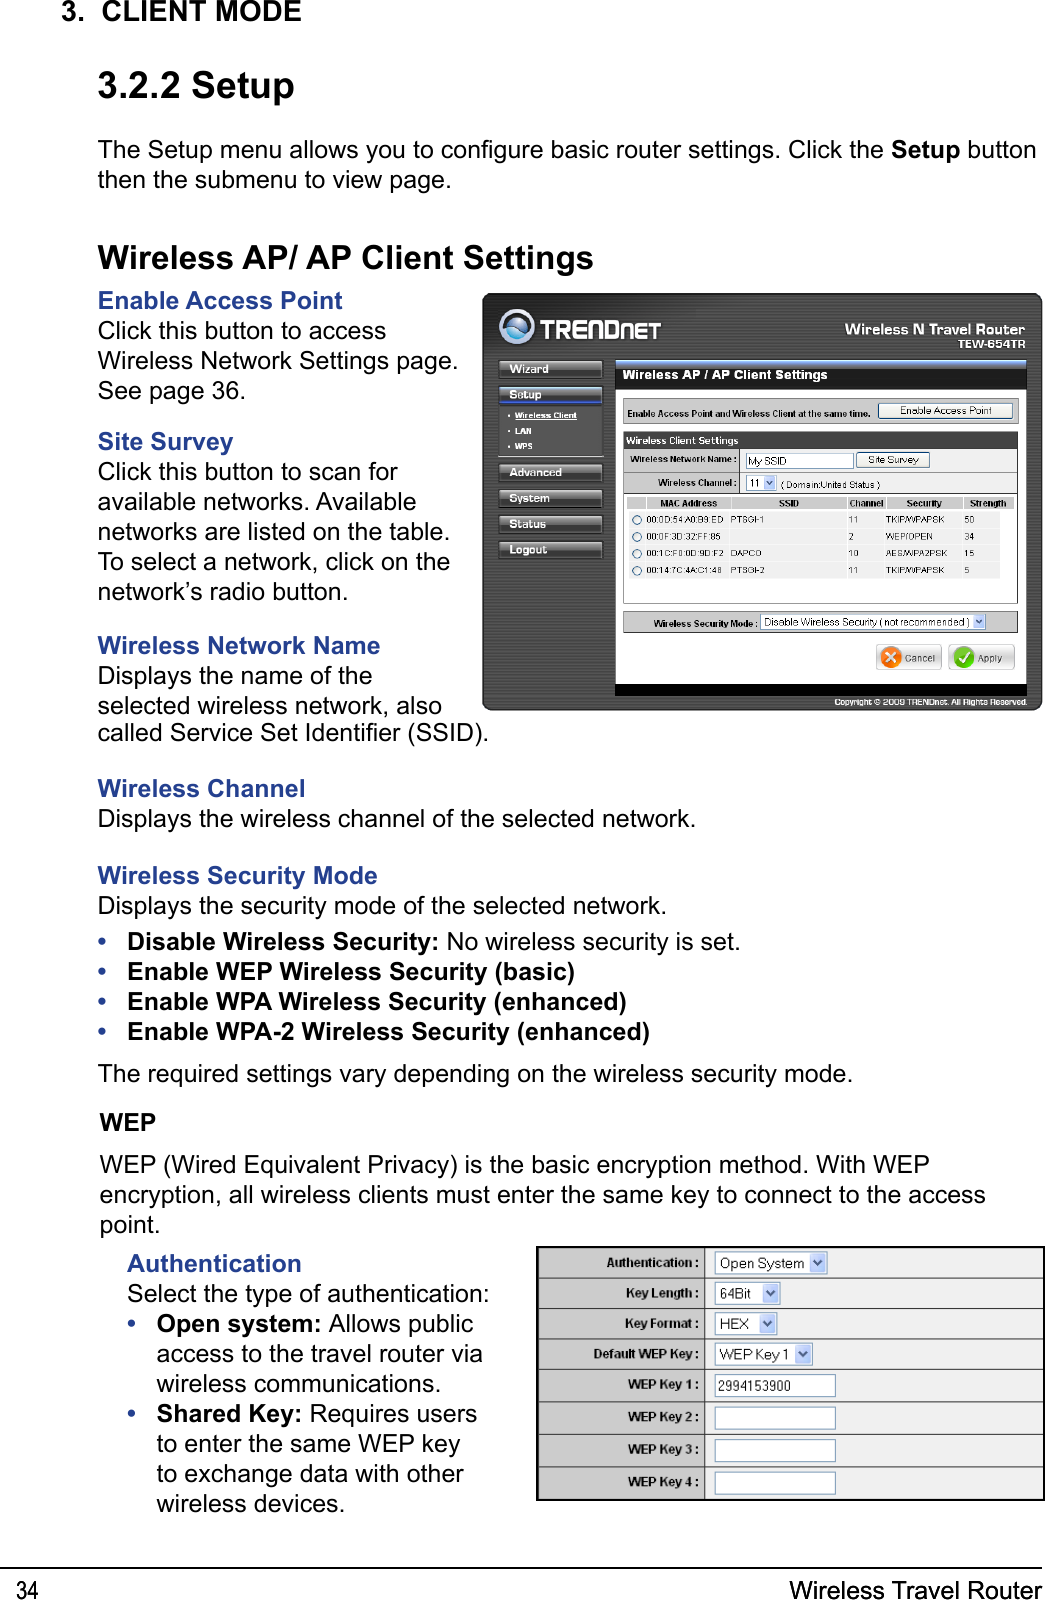 Wireless Travel Router34 Wireless Travel Router343.  CLIENT MODE3.2.2 SetupThe Setup menu allows you to congure basic router settings. Click the Setup button then the submenu to view page.Wireless AP/ AP Client SettingsEnable Access PointClick this button to access Wireless Network Settings page. See page 36.Site SurveyClick this button to scan for available networks. Available networks are listed on the table. To select a network, click on the network’s radio button.Wireless Network NameDisplays the name of the selected wireless network, also called Service Set Identier (SSID).Wireless ChannelDisplays the wireless channel of the selected network.Wireless Security ModeDisplays the security mode of the selected network.Disable Wireless Security: No wireless security is set.Enable WEP Wireless Security (basic)Enable WPA Wireless Security (enhanced)Enable WPA-2 Wireless Security (enhanced)The required settings vary depending on the wireless security mode. ••••WEPWEP (Wired Equivalent Privacy) is the basic encryption method. With WEP encryption, all wireless clients must enter the same key to connect to the access point.AuthenticationSelect the type of authentication:Open system: Allows public access to the travel router via wireless communications.Shared Key: Requires users to enter the same WEP key to exchange data with other wireless devices.••